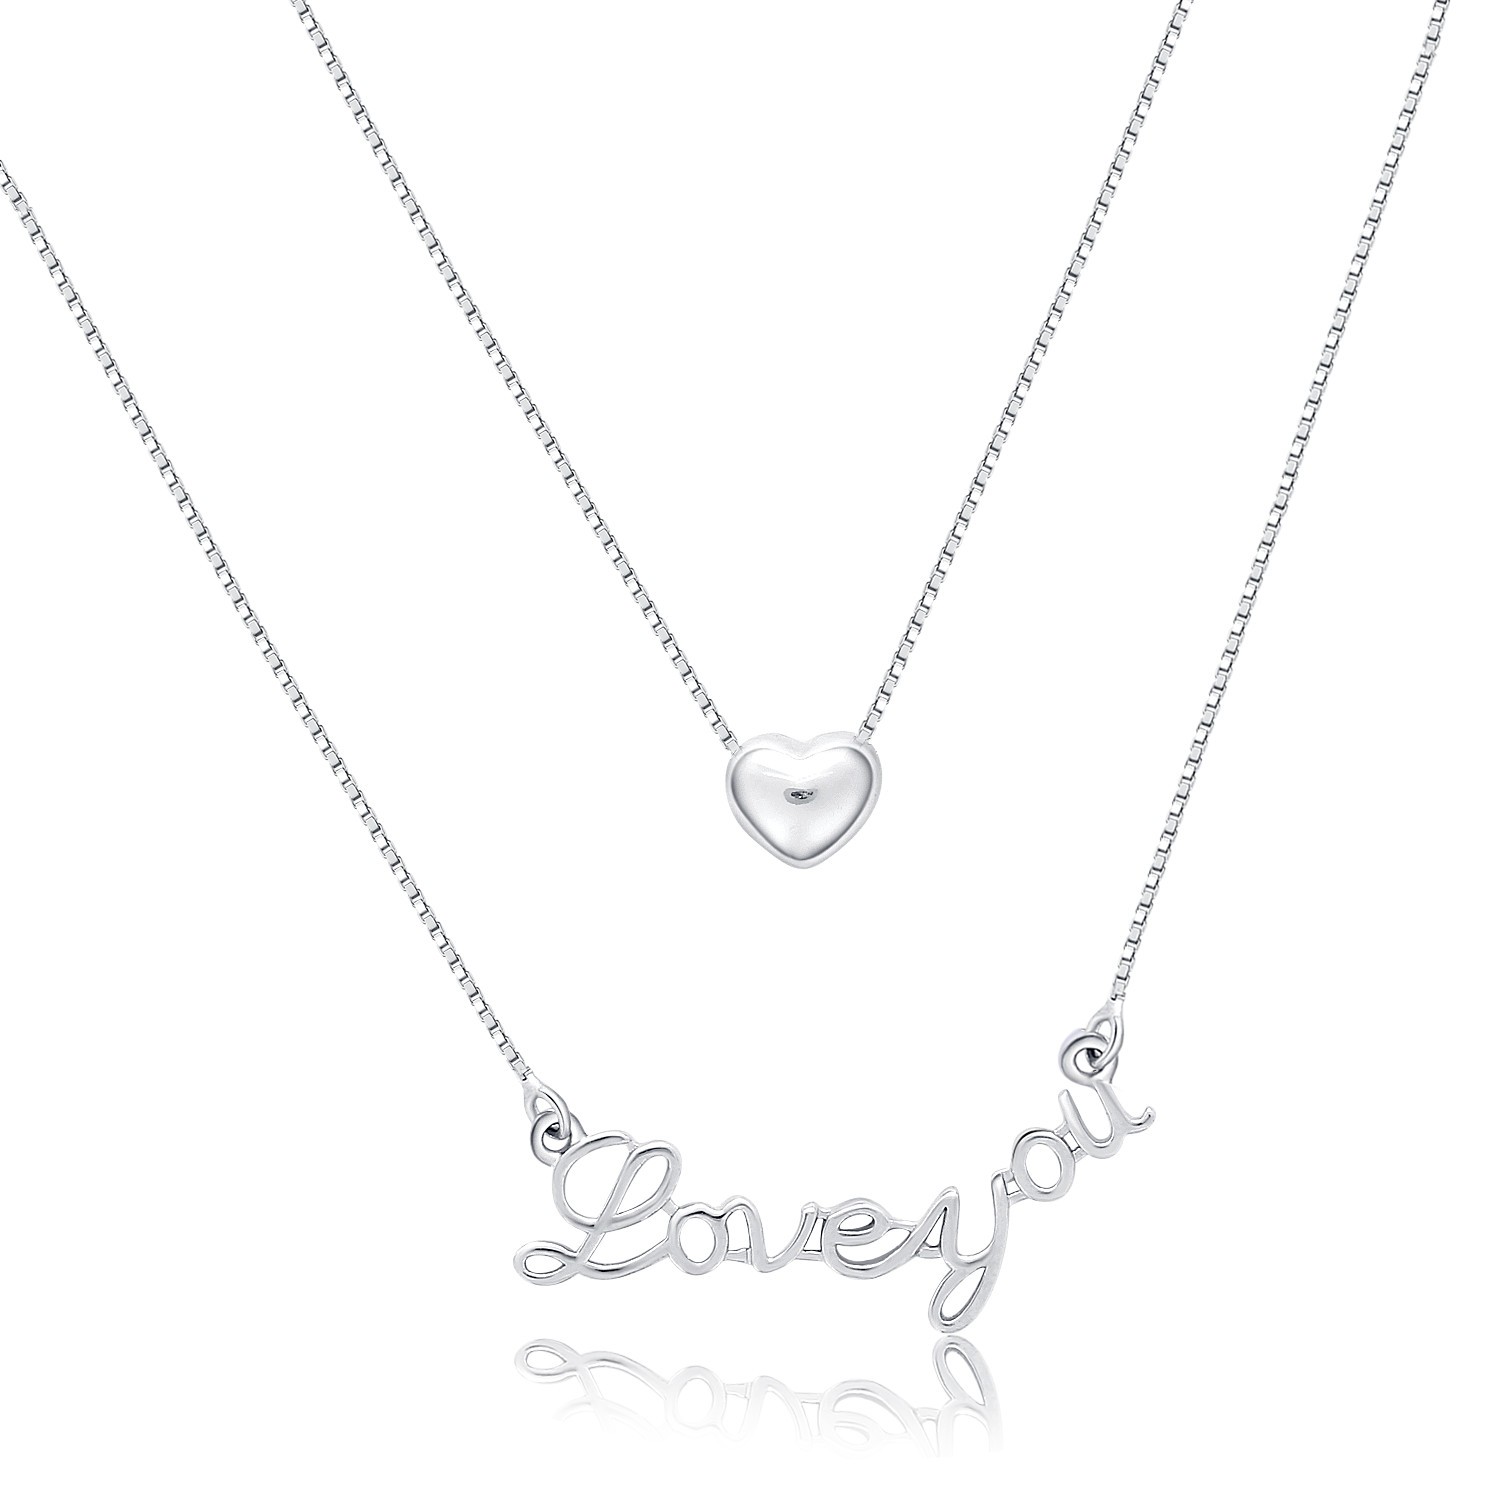 925 sterling silver personalzie pendant necklace chain couple jewelry OEM/ODM welcome necklace chain